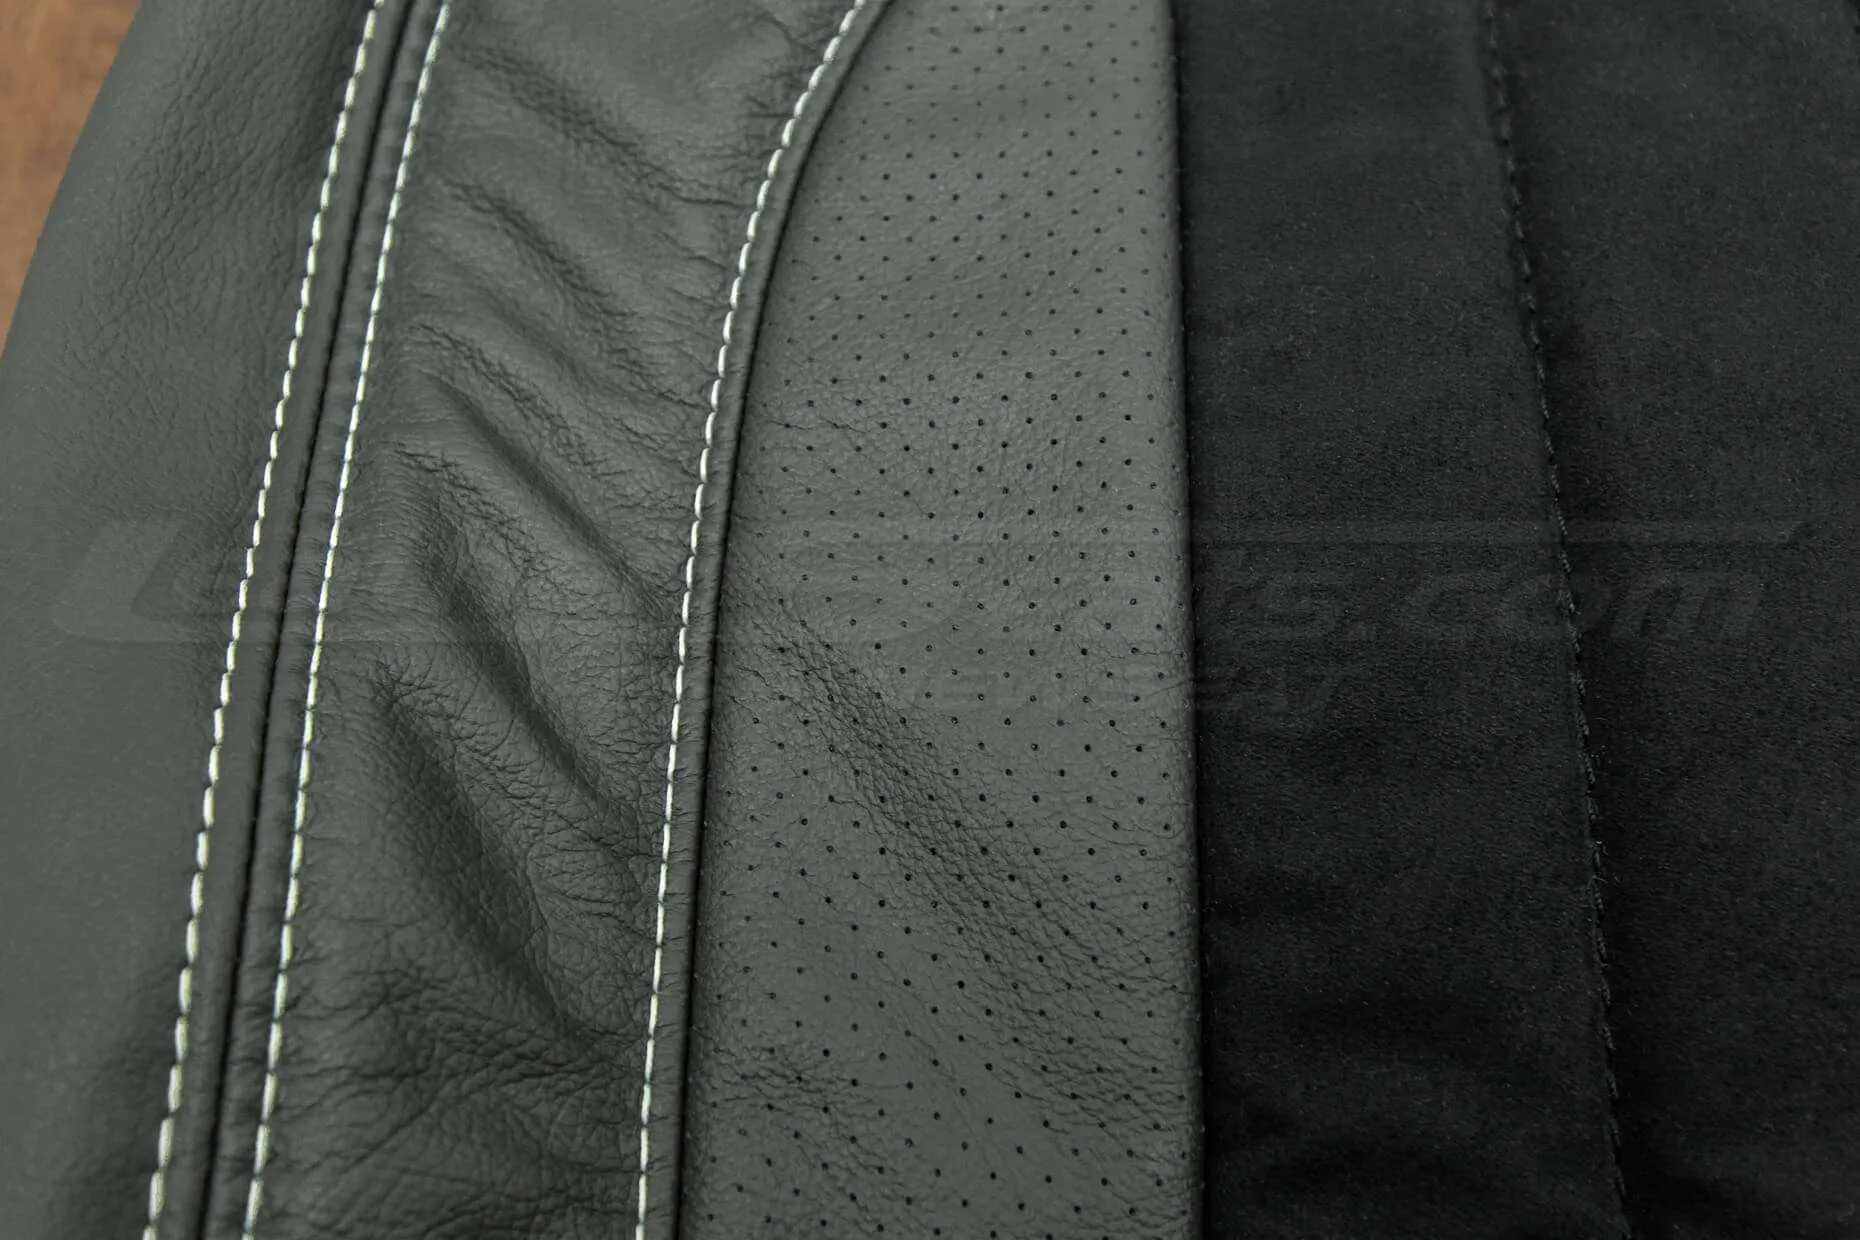 Dodge Ram Leather Upholstery - Backrest perforated wing and side double-stitching